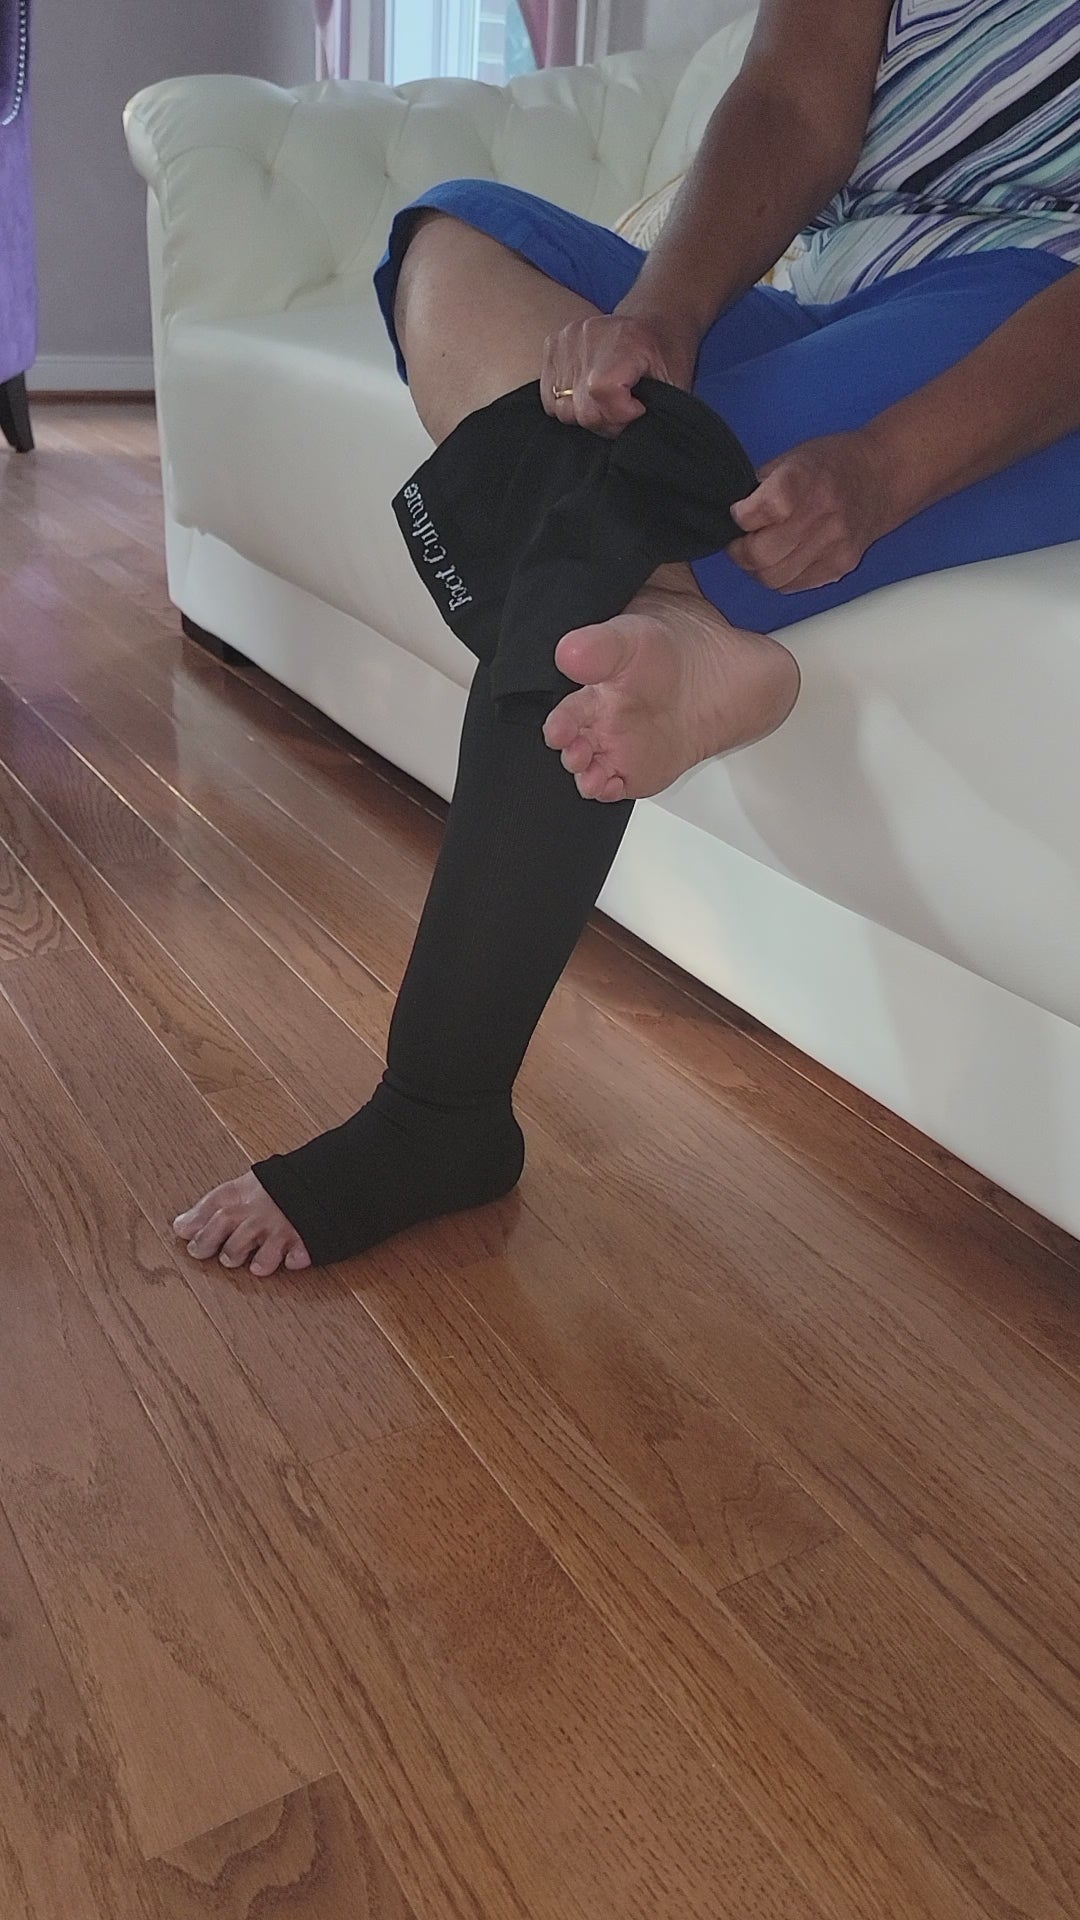 How to put on your recovery compression socks